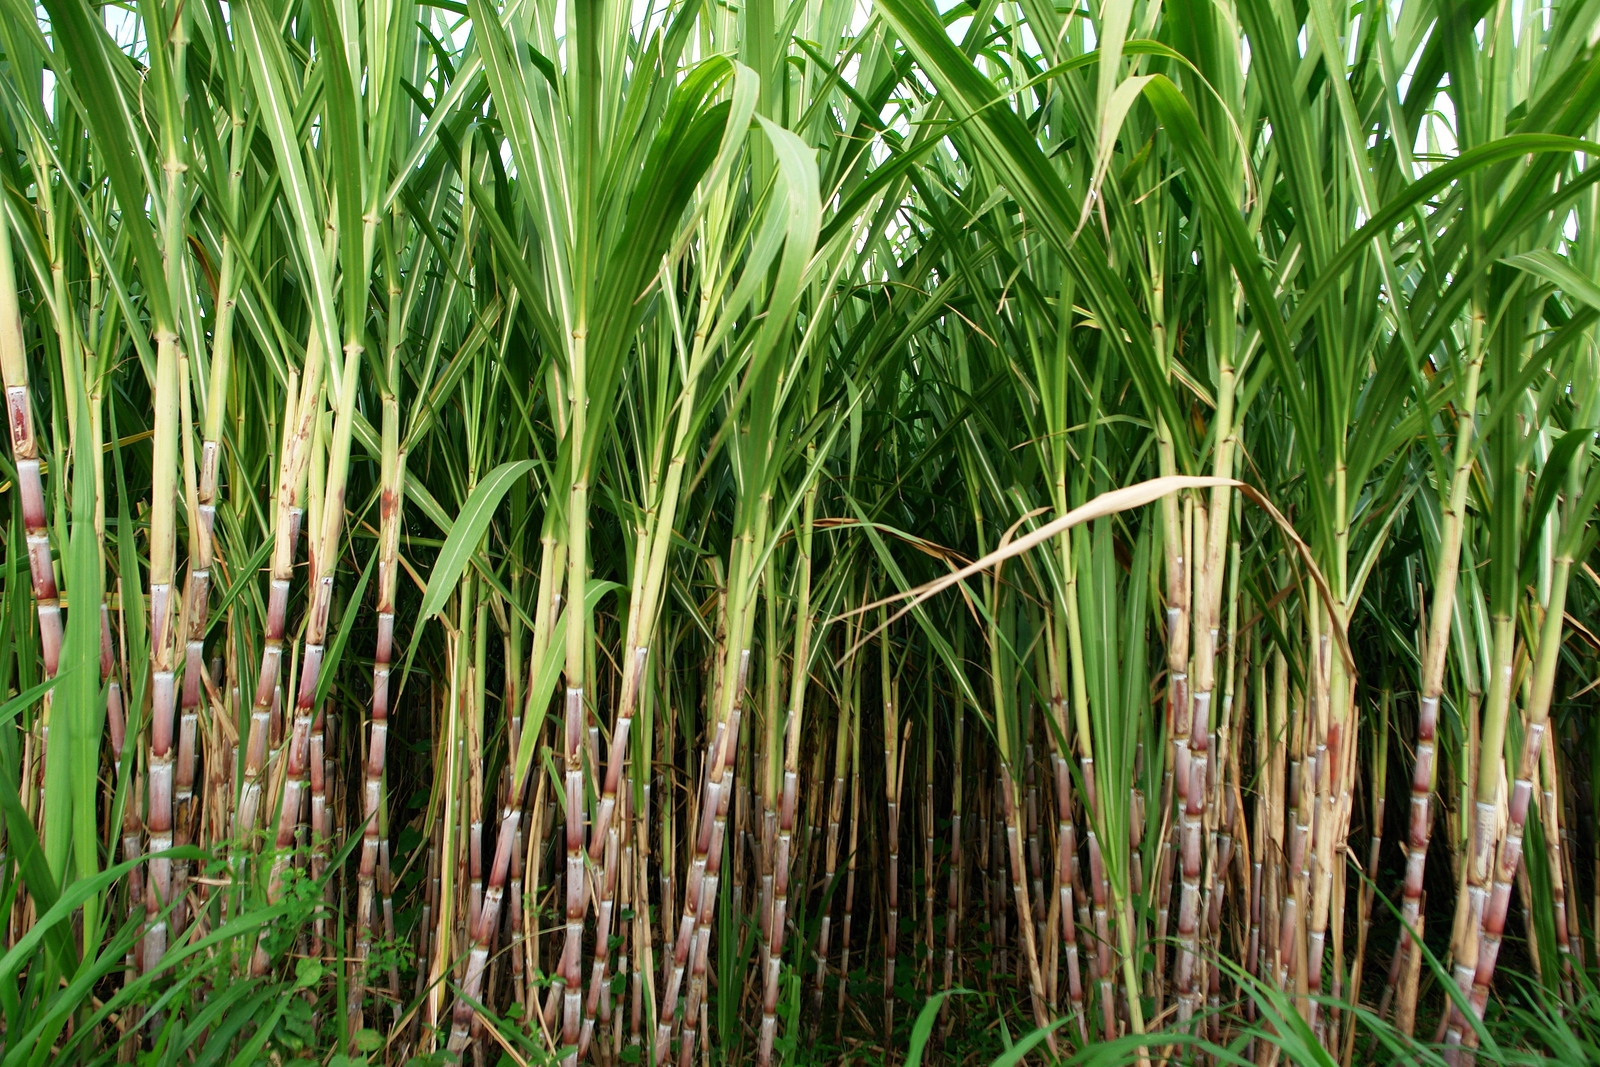 Top 10 Highest Sugarcane Producing Countries